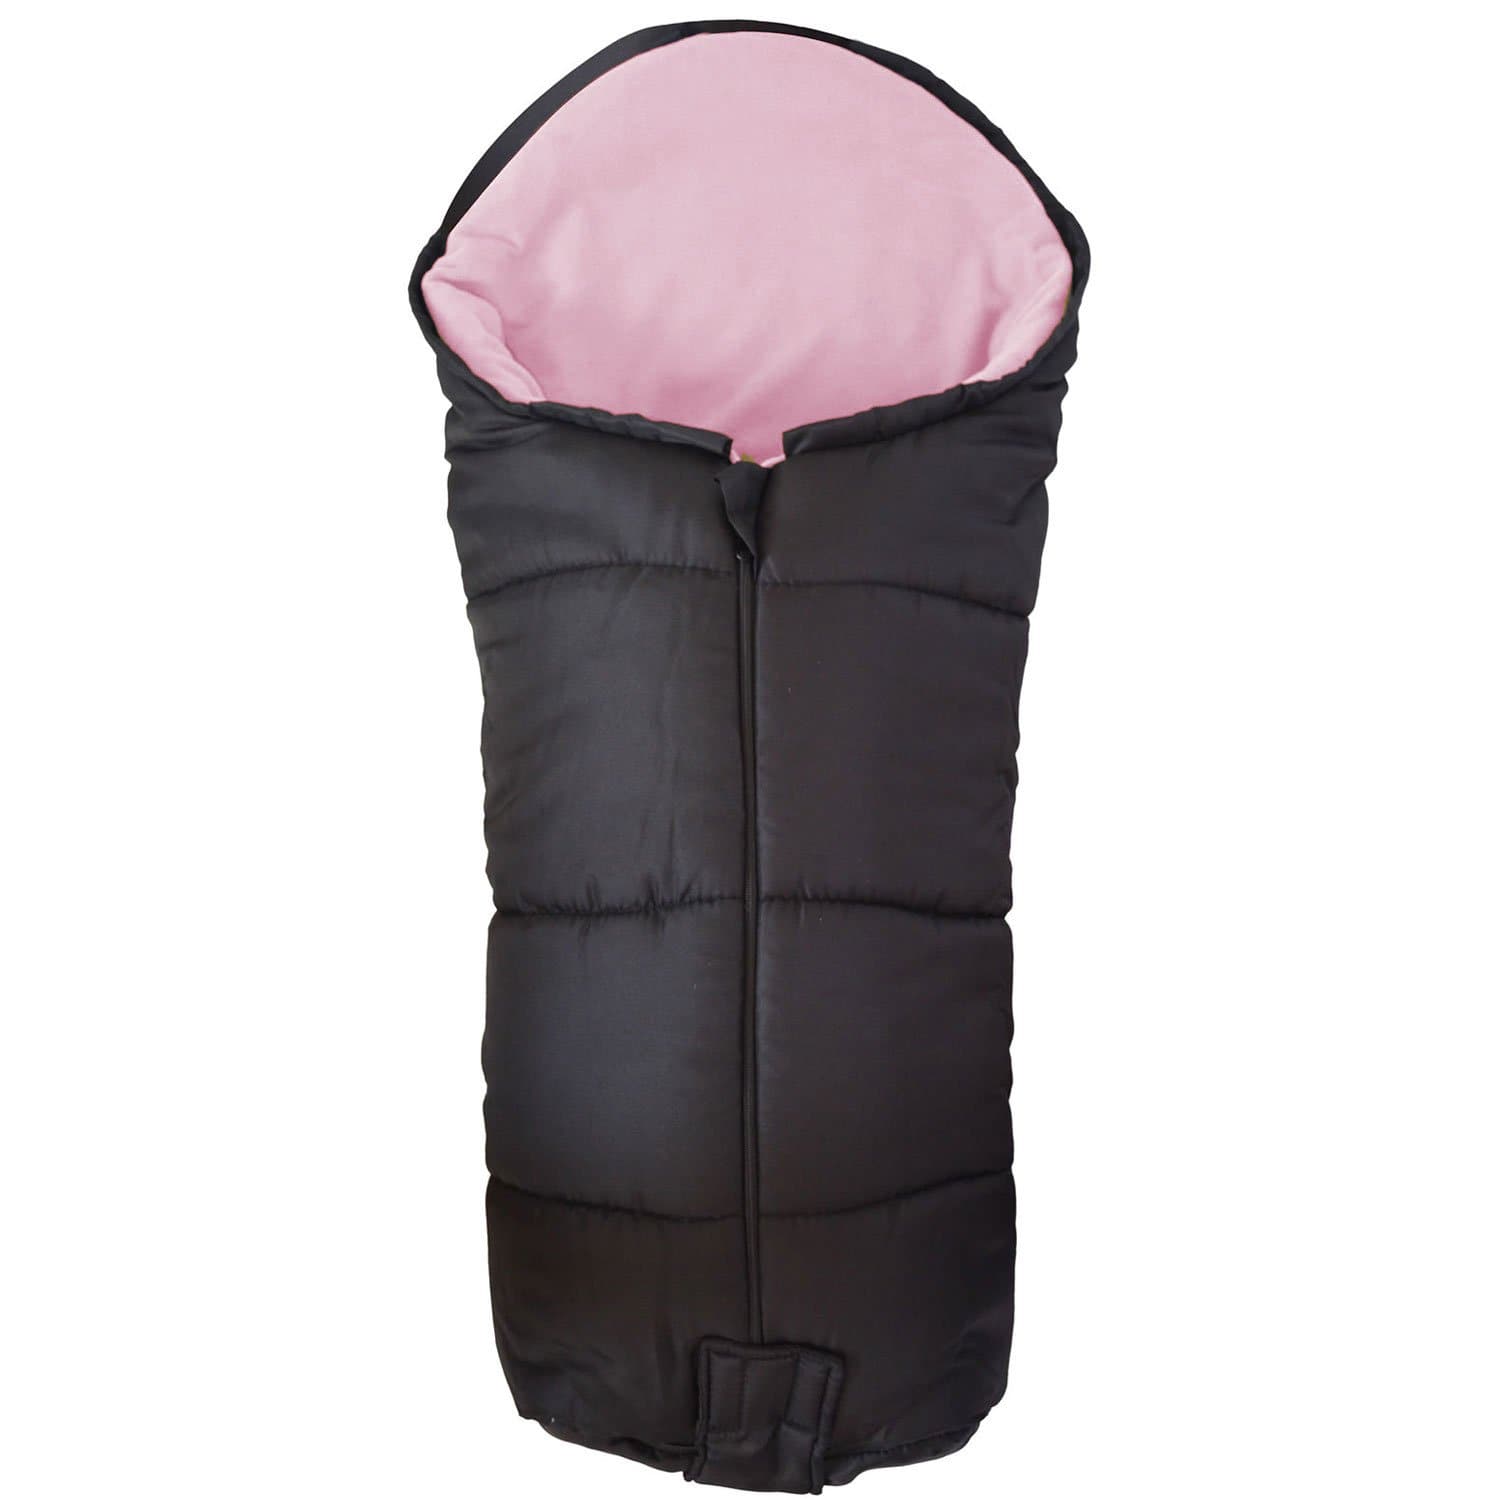 Universal Deluxe Pushchair Footmuff / Cosy Toes - Fits All Pushchairs / Prams And Buggies Light Pink Fits All Models 